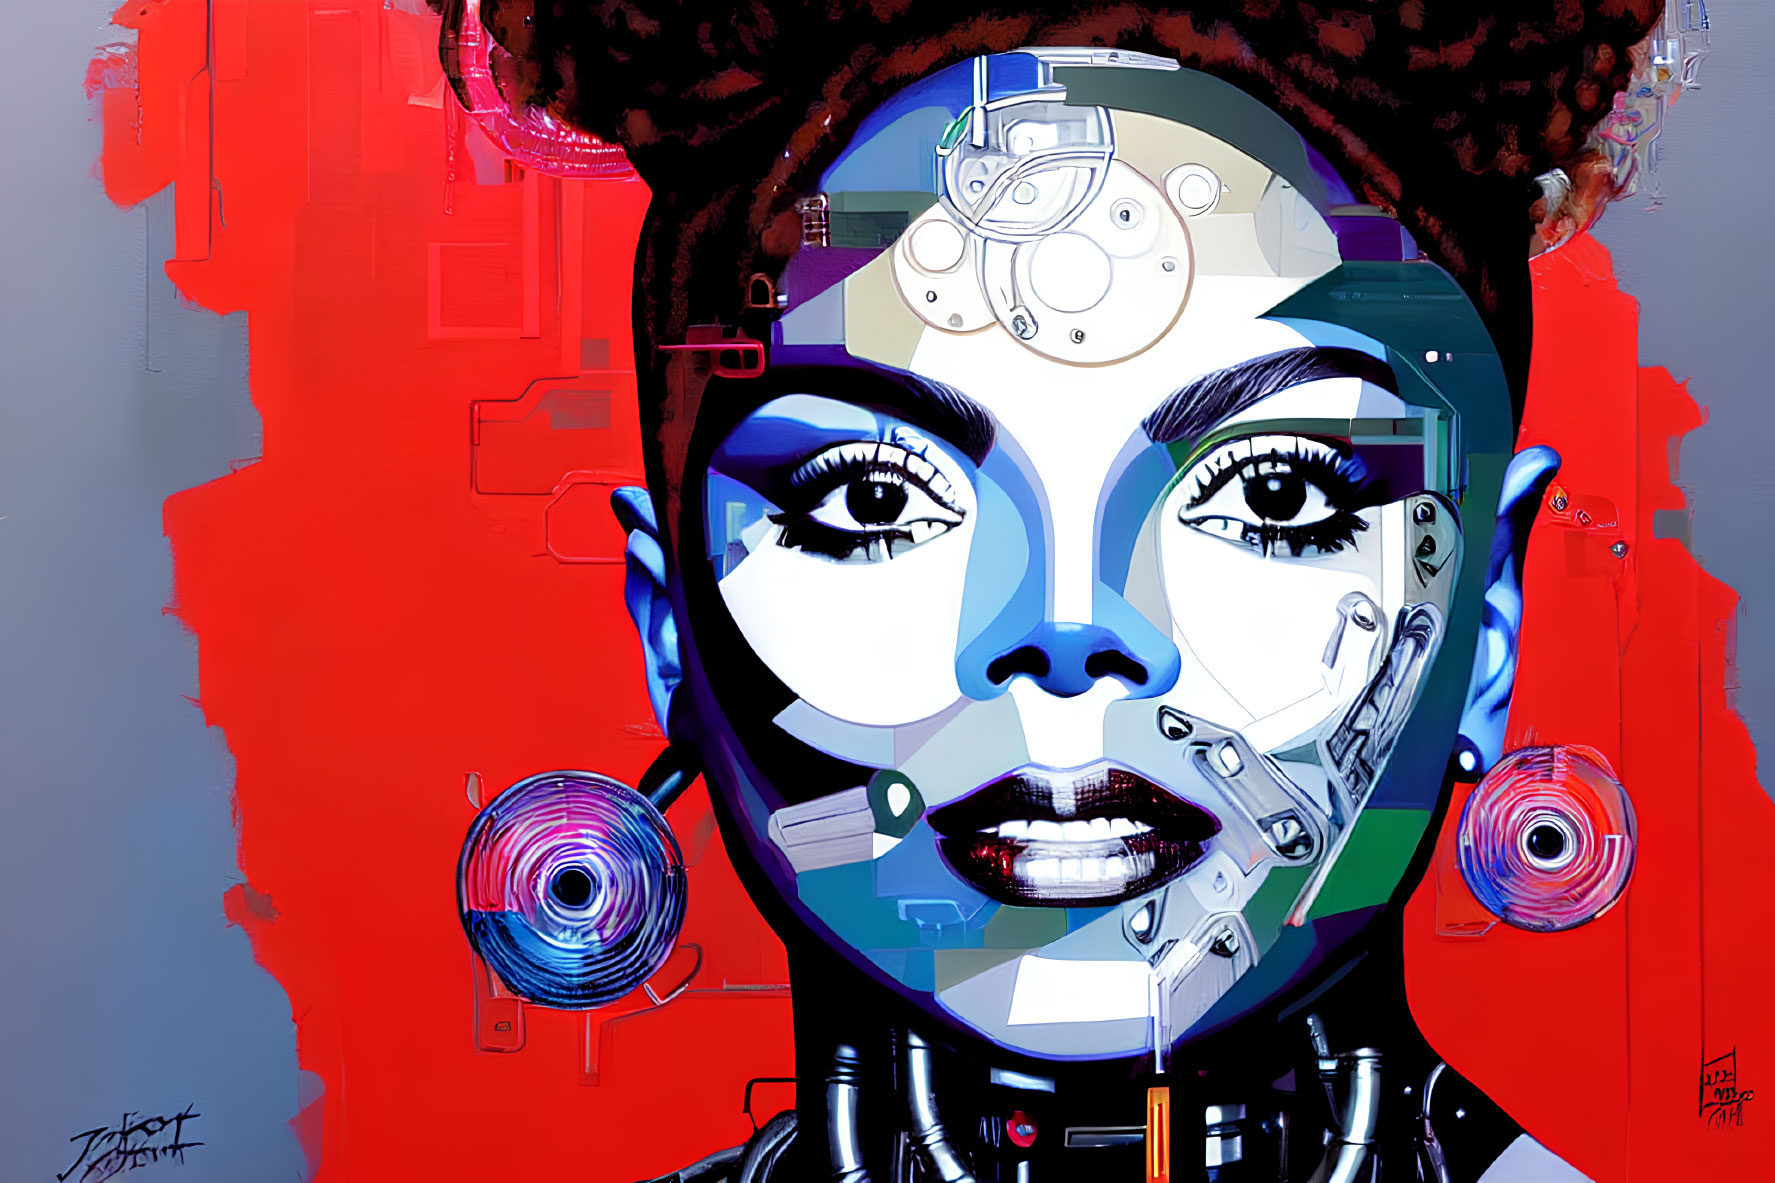 Colorful portrayal of a woman with cyborg features on red and grey backdrop